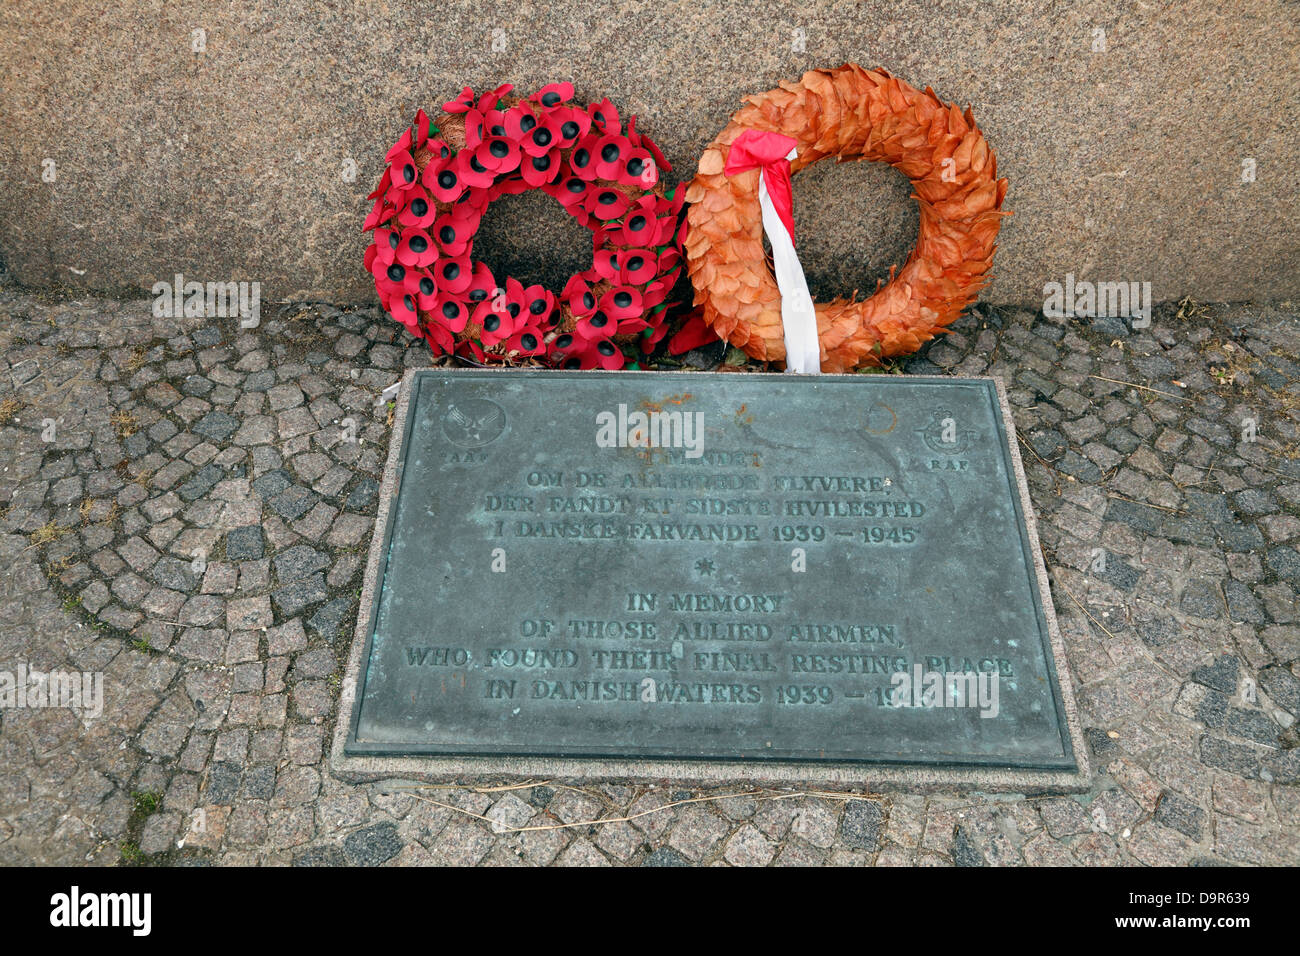 RAF tablet at WW2 memorial at Tuborg Havn in memory of those allied airmen, who found their final resting place in Danish waters Stock Photo